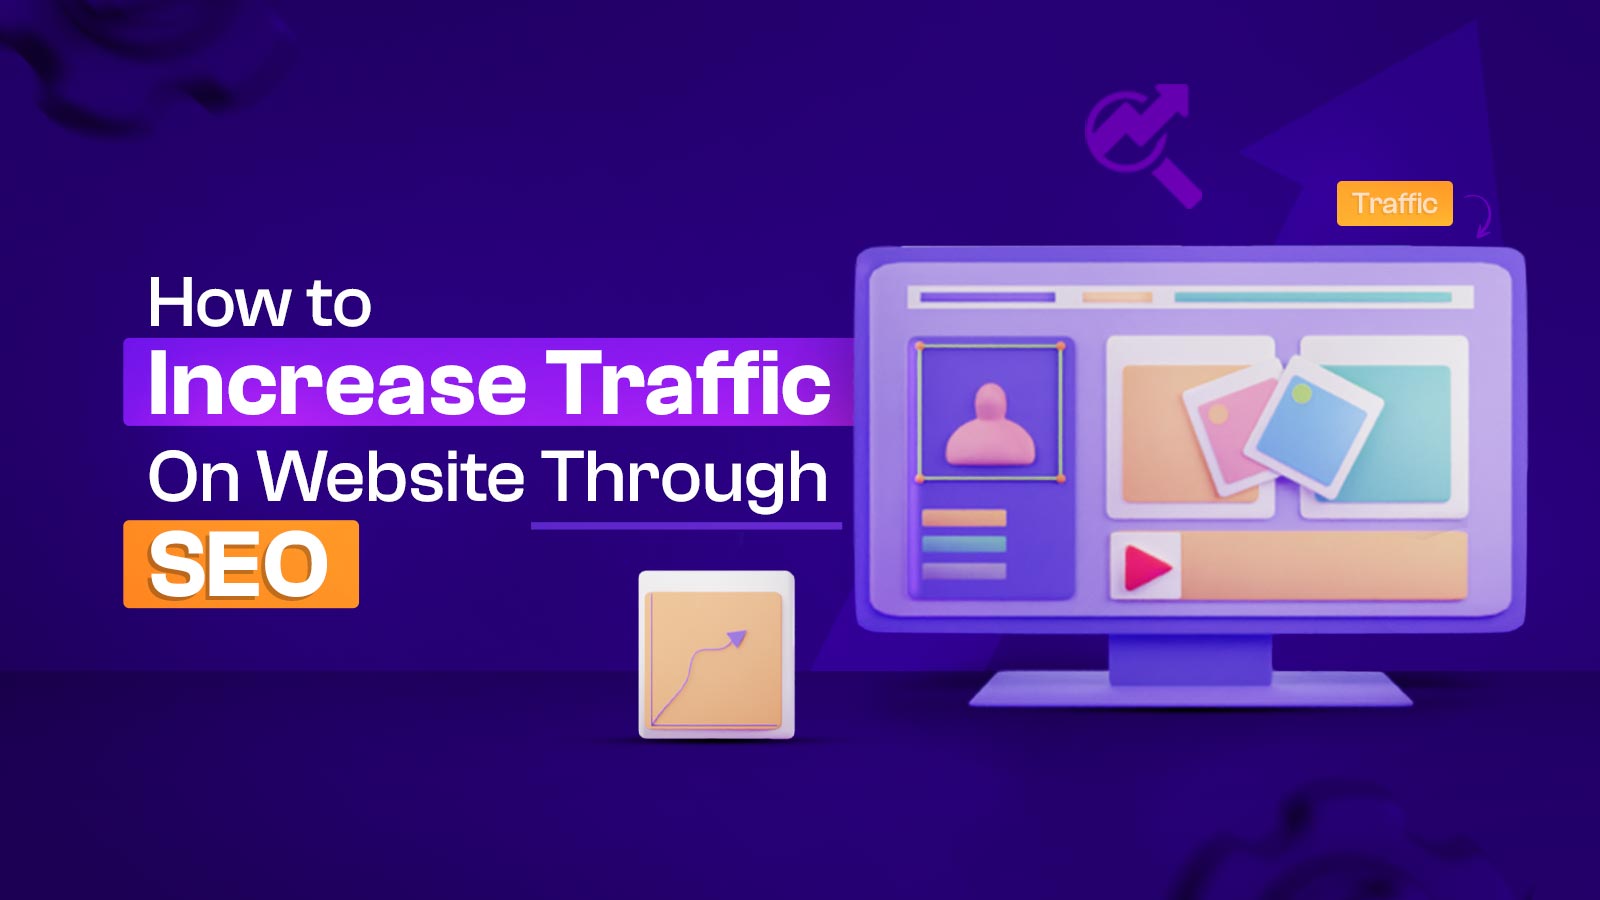 8 Ways On How To Increase Traffic On Website Through SEO